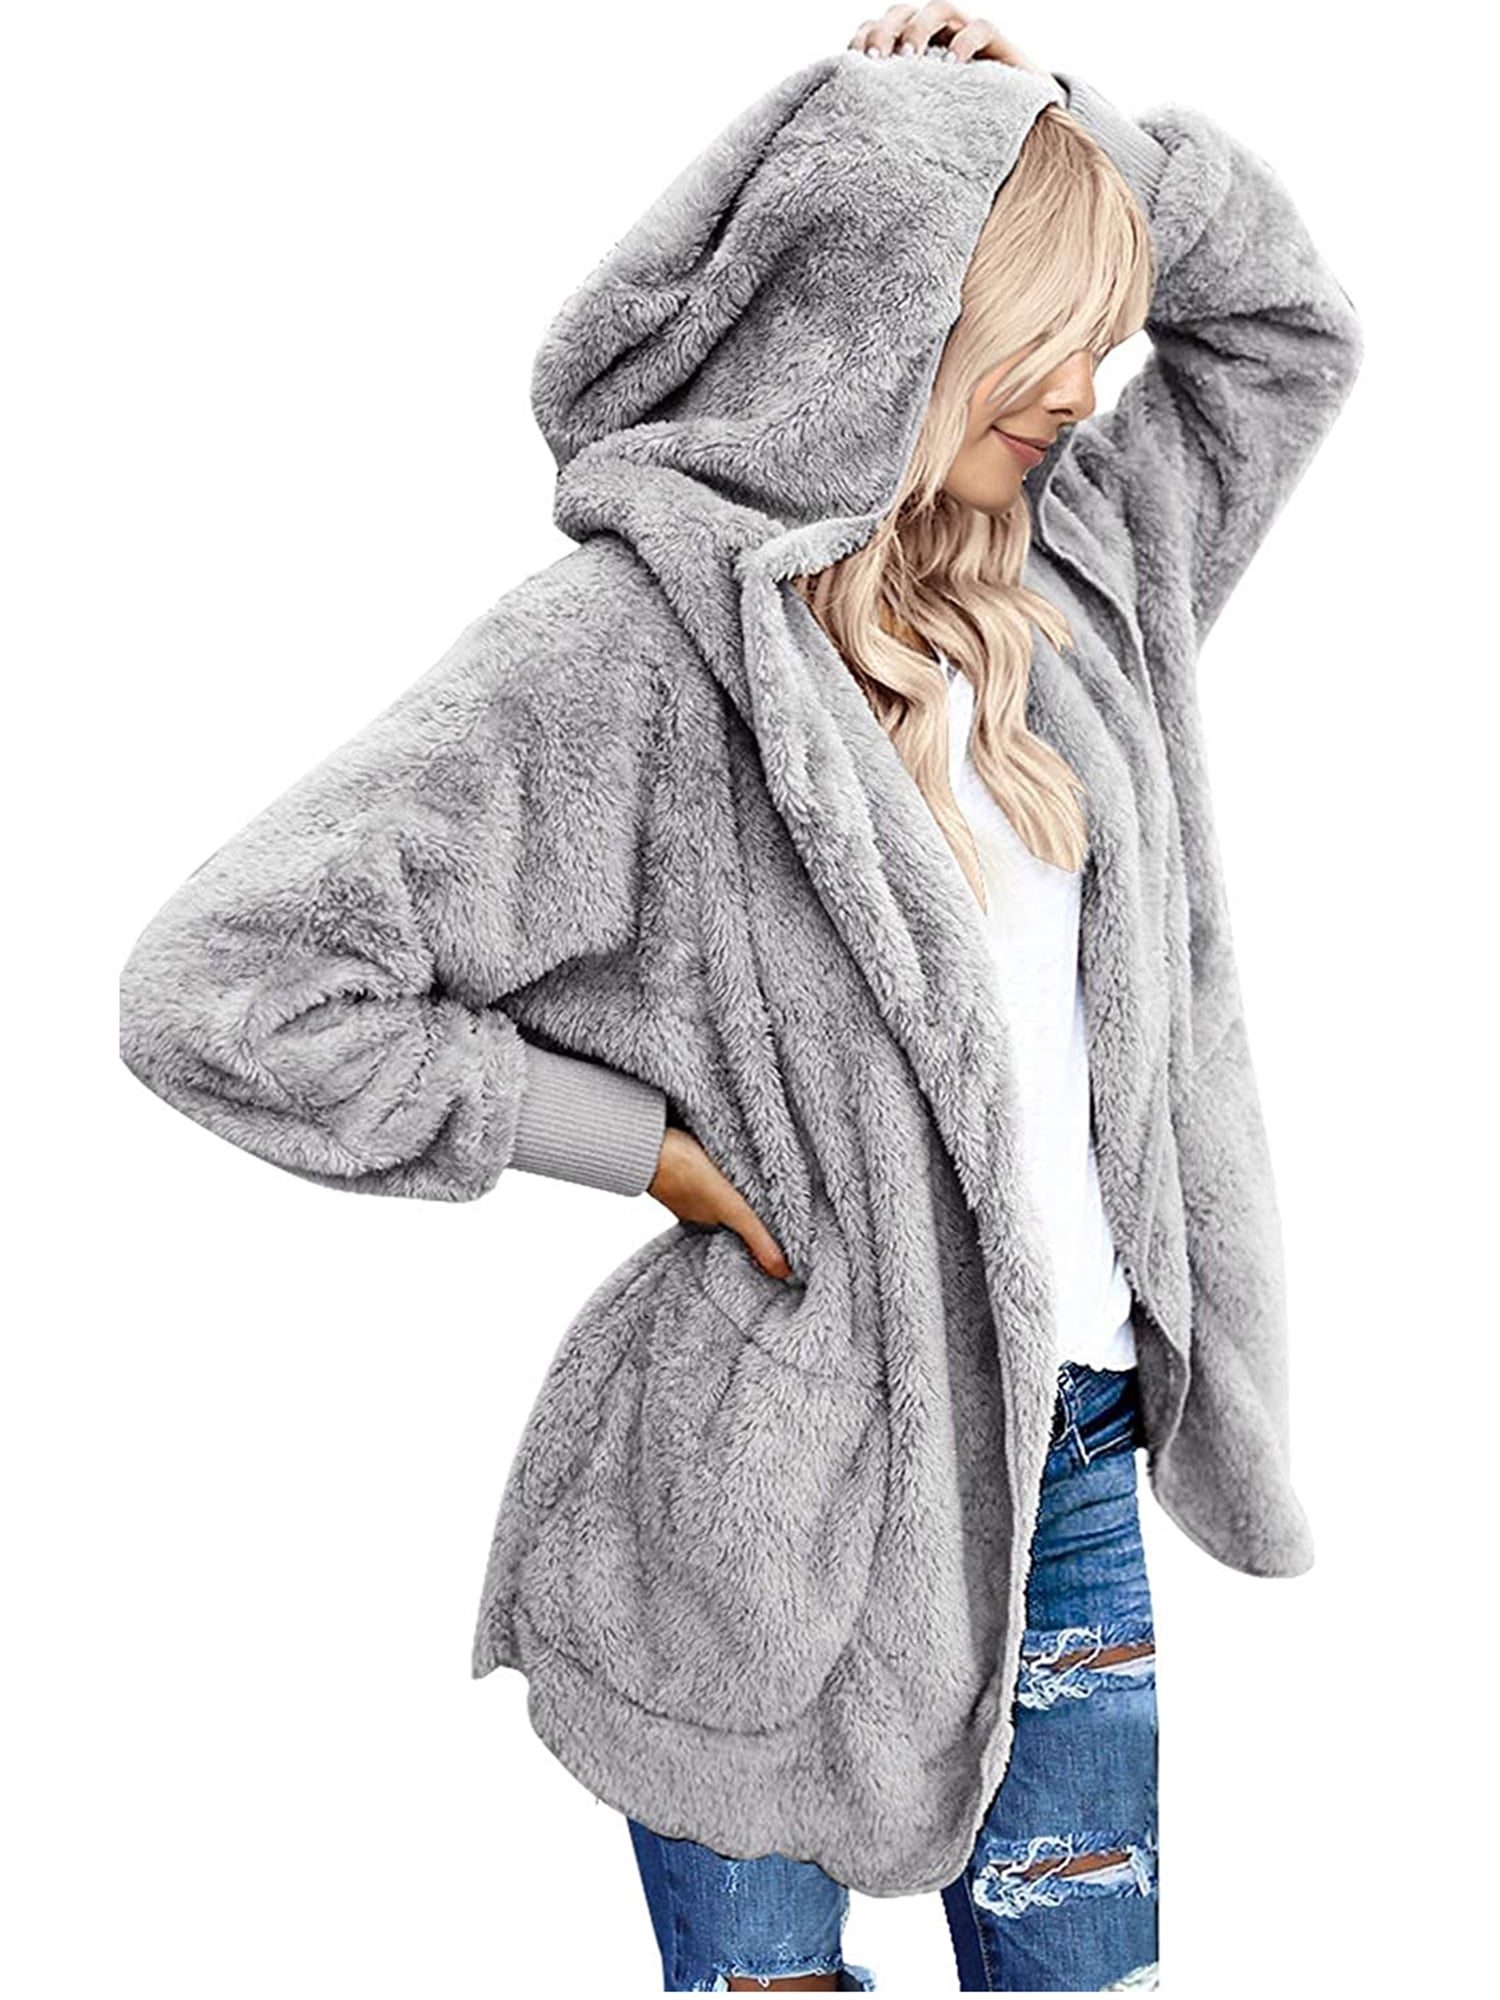 GIFED Womens Long Sleeve Solid Fuzzy Fleece Open Front Hooded Cardigans Jacket Coats Outwear with Pocket 